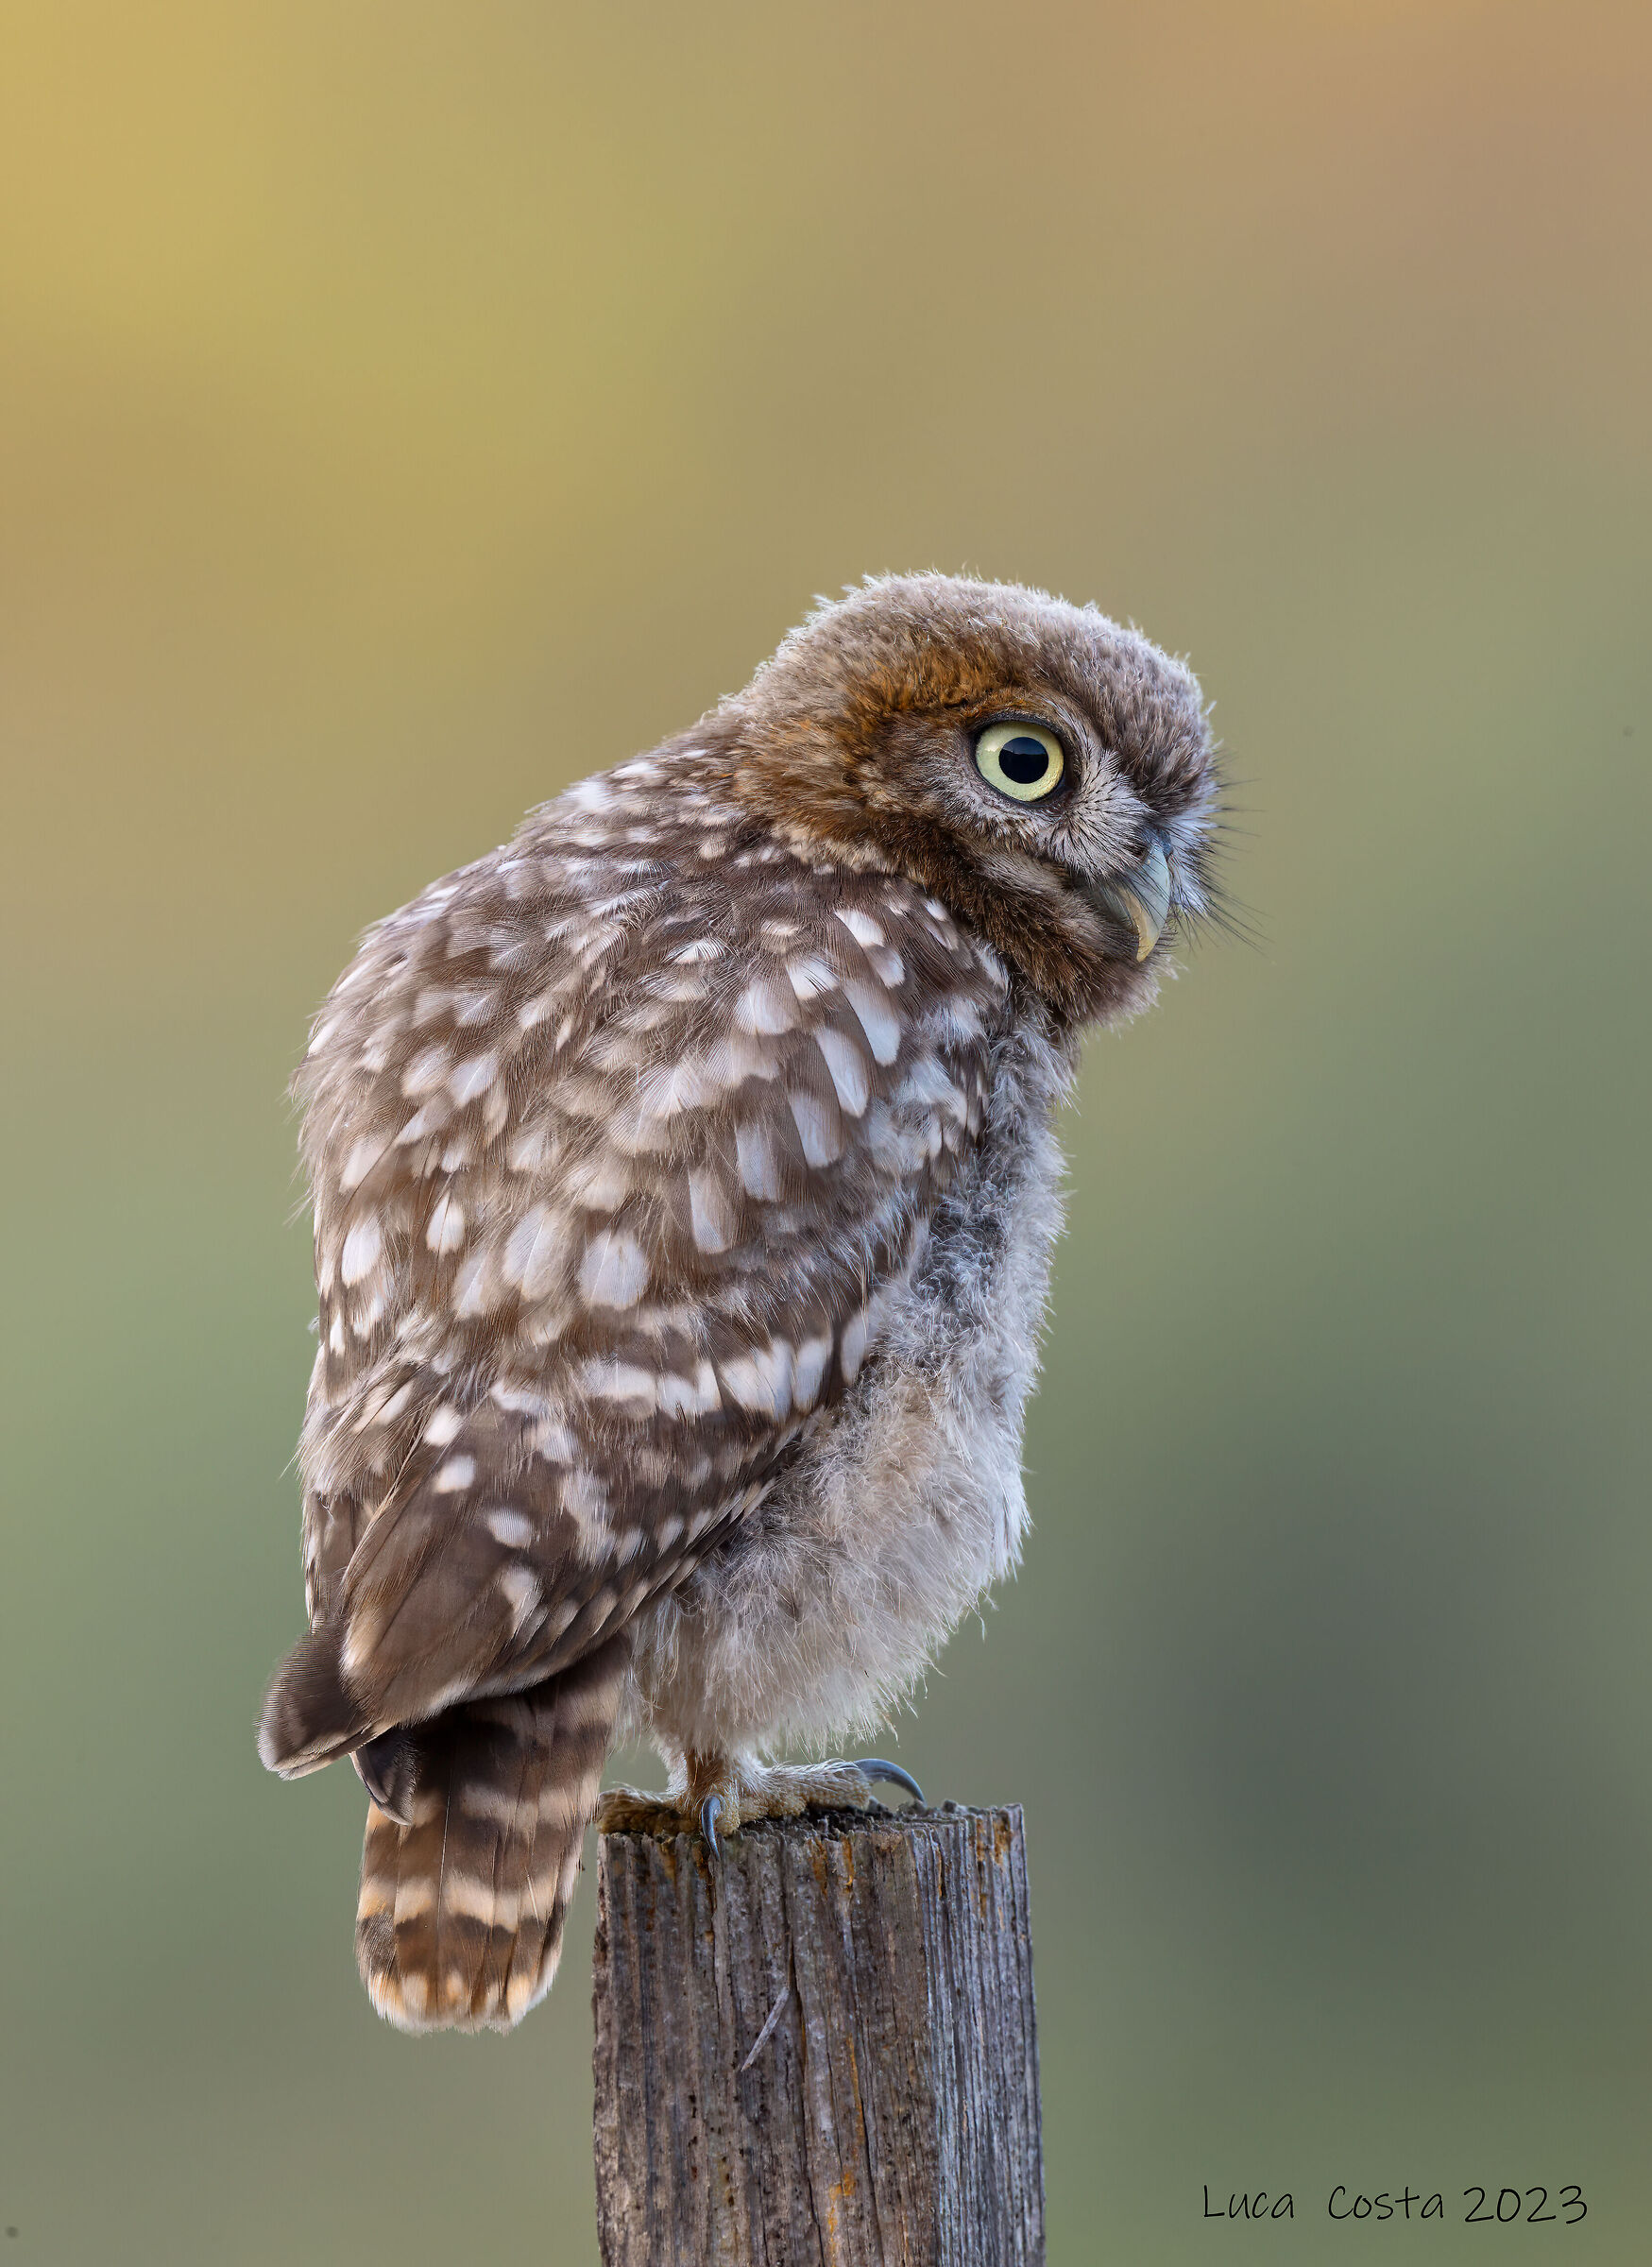 Owl pullo in the early morning...